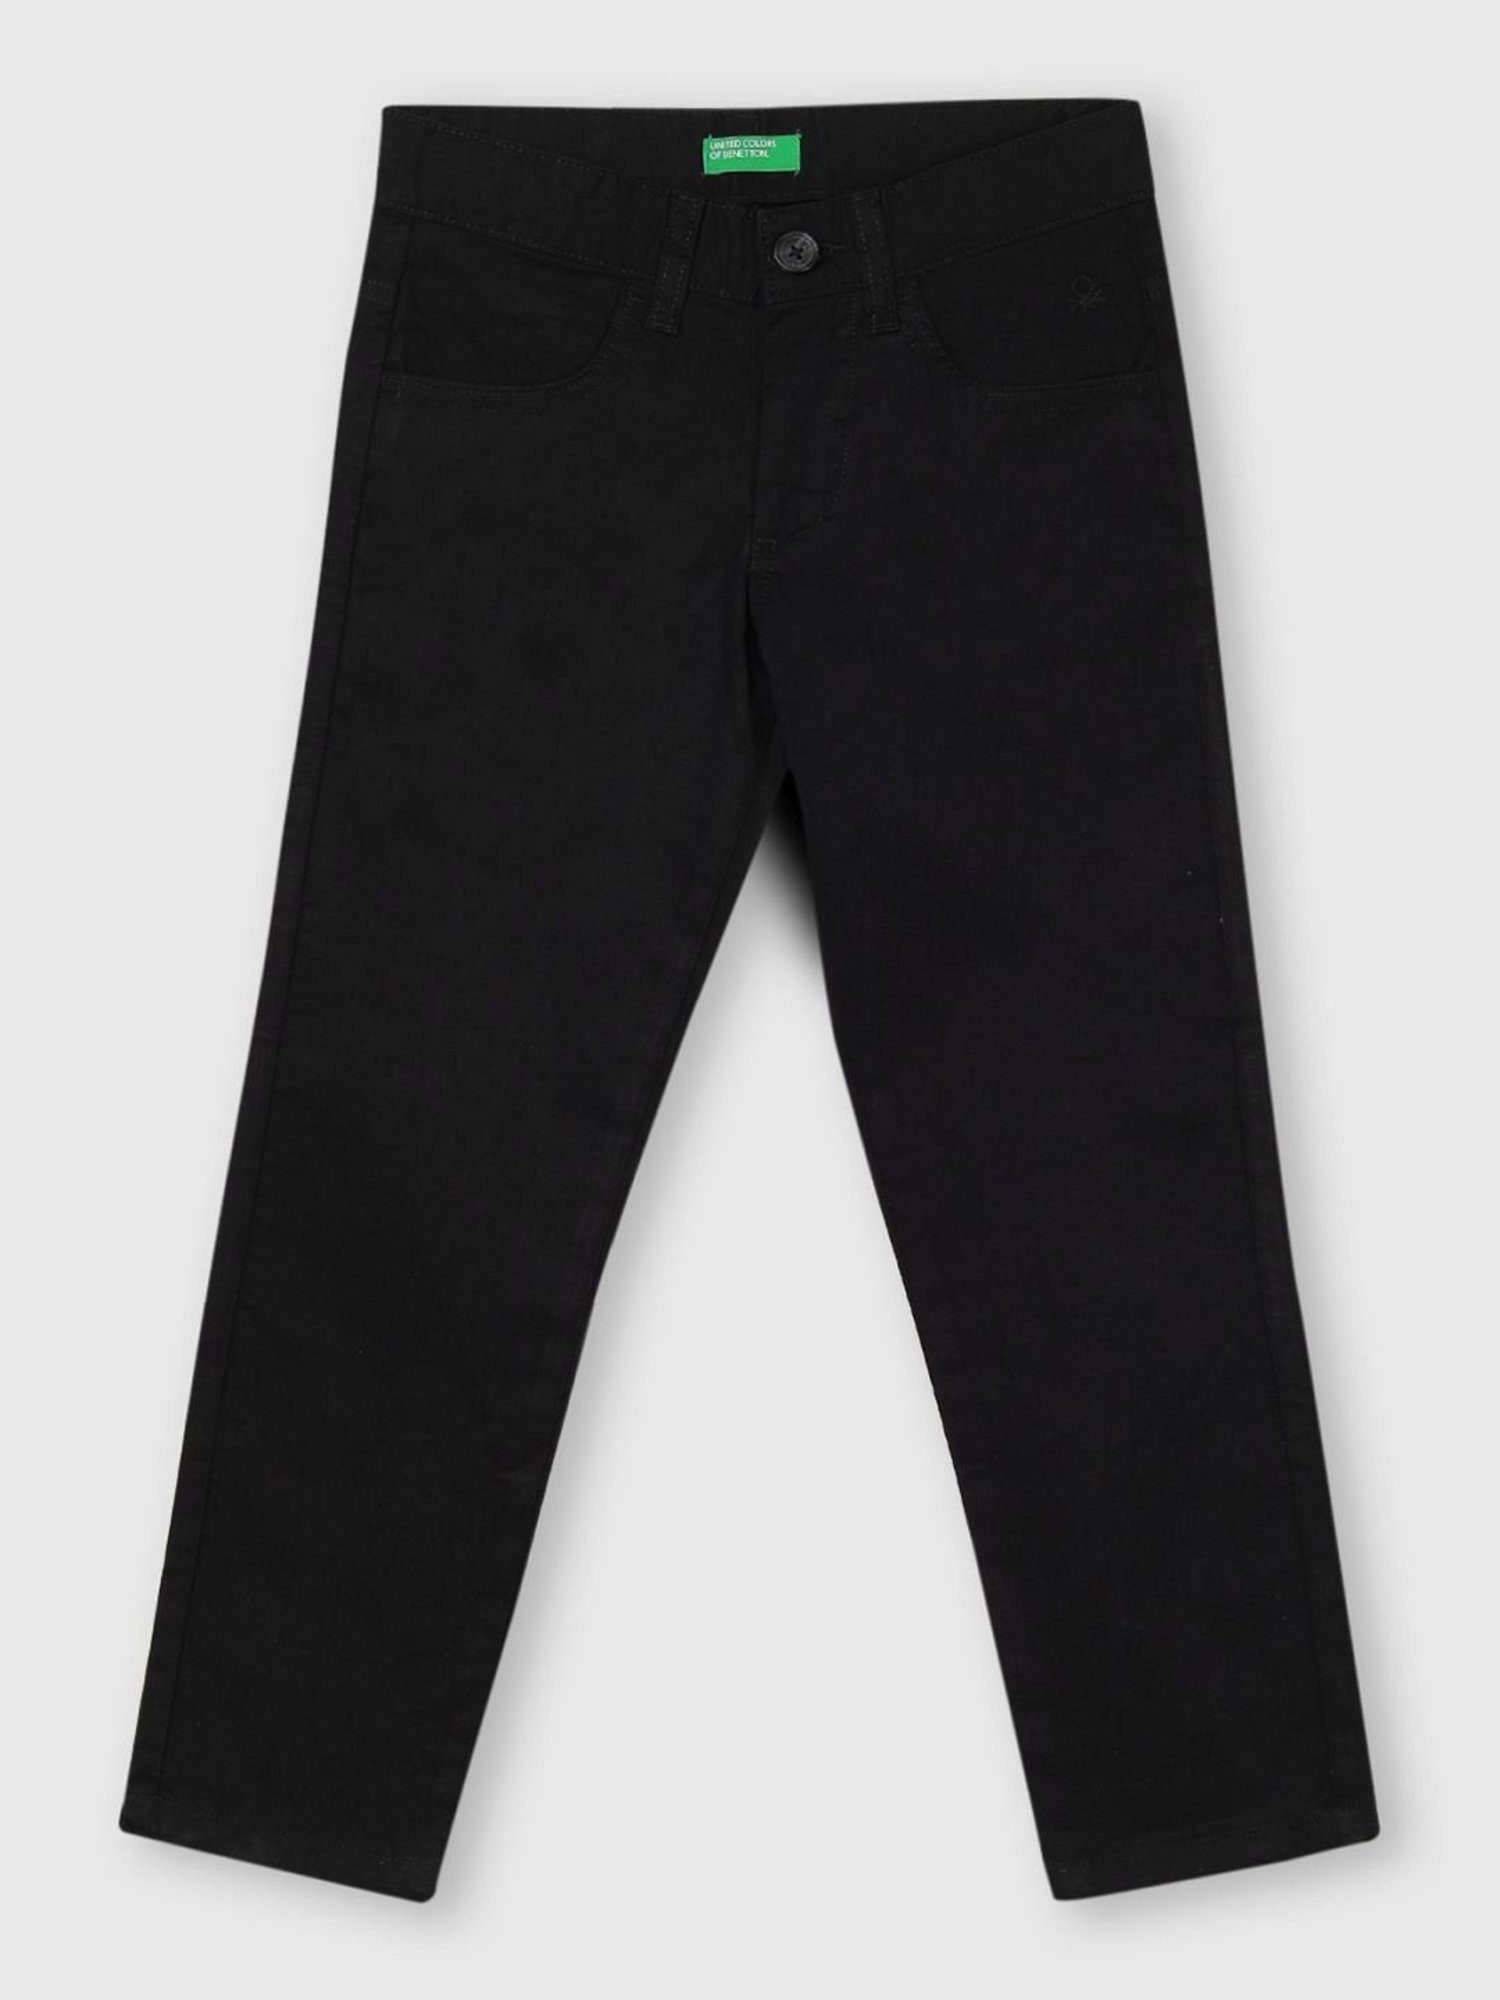 Buy Tommy Hilfiger Kids Black Cotton Trousers for Boys Clothing Online @  Tata CLiQ